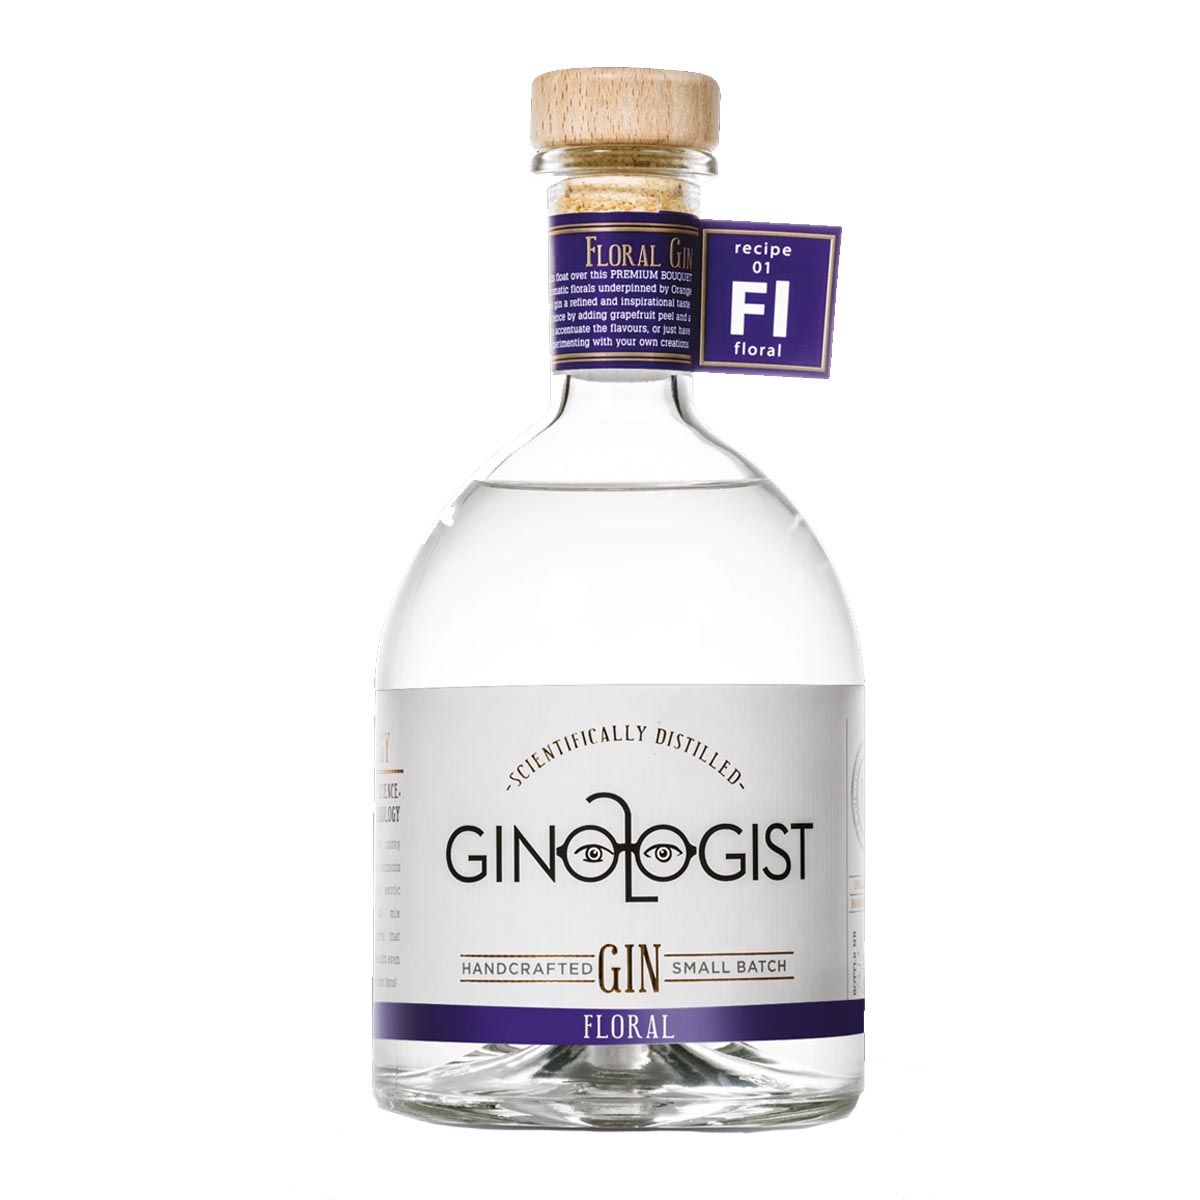  Ginologist Floral